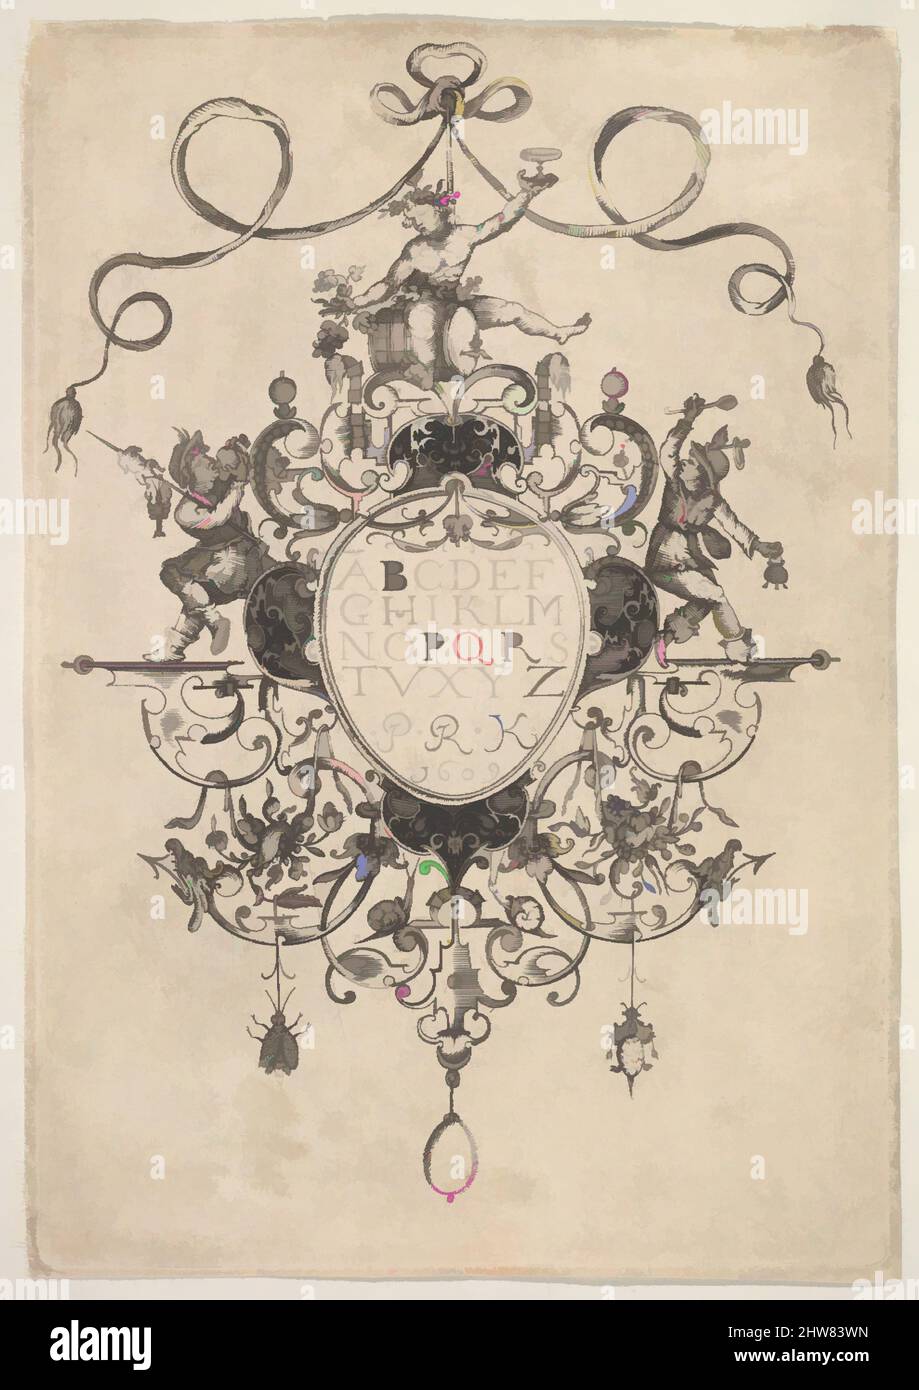 Art inspired by Design for a Pendant with the Alphabet, 1609, Engraving and blackwork, Plate: 5 5/16 x 3 11/16 in. (13.5 x 9.4 cm), Master P.R.K (Dutch, ca. 1609–1617), Design for a pendant in fine goldsmiths work. The pendant is hanging from a ribbon and has an oval central, Classic works modernized by Artotop with a splash of modernity. Shapes, color and value, eye-catching visual impact on art. Emotions through freedom of artworks in a contemporary way. A timeless message pursuing a wildly creative new direction. Artists turning to the digital medium and creating the Artotop NFT Stock Photo